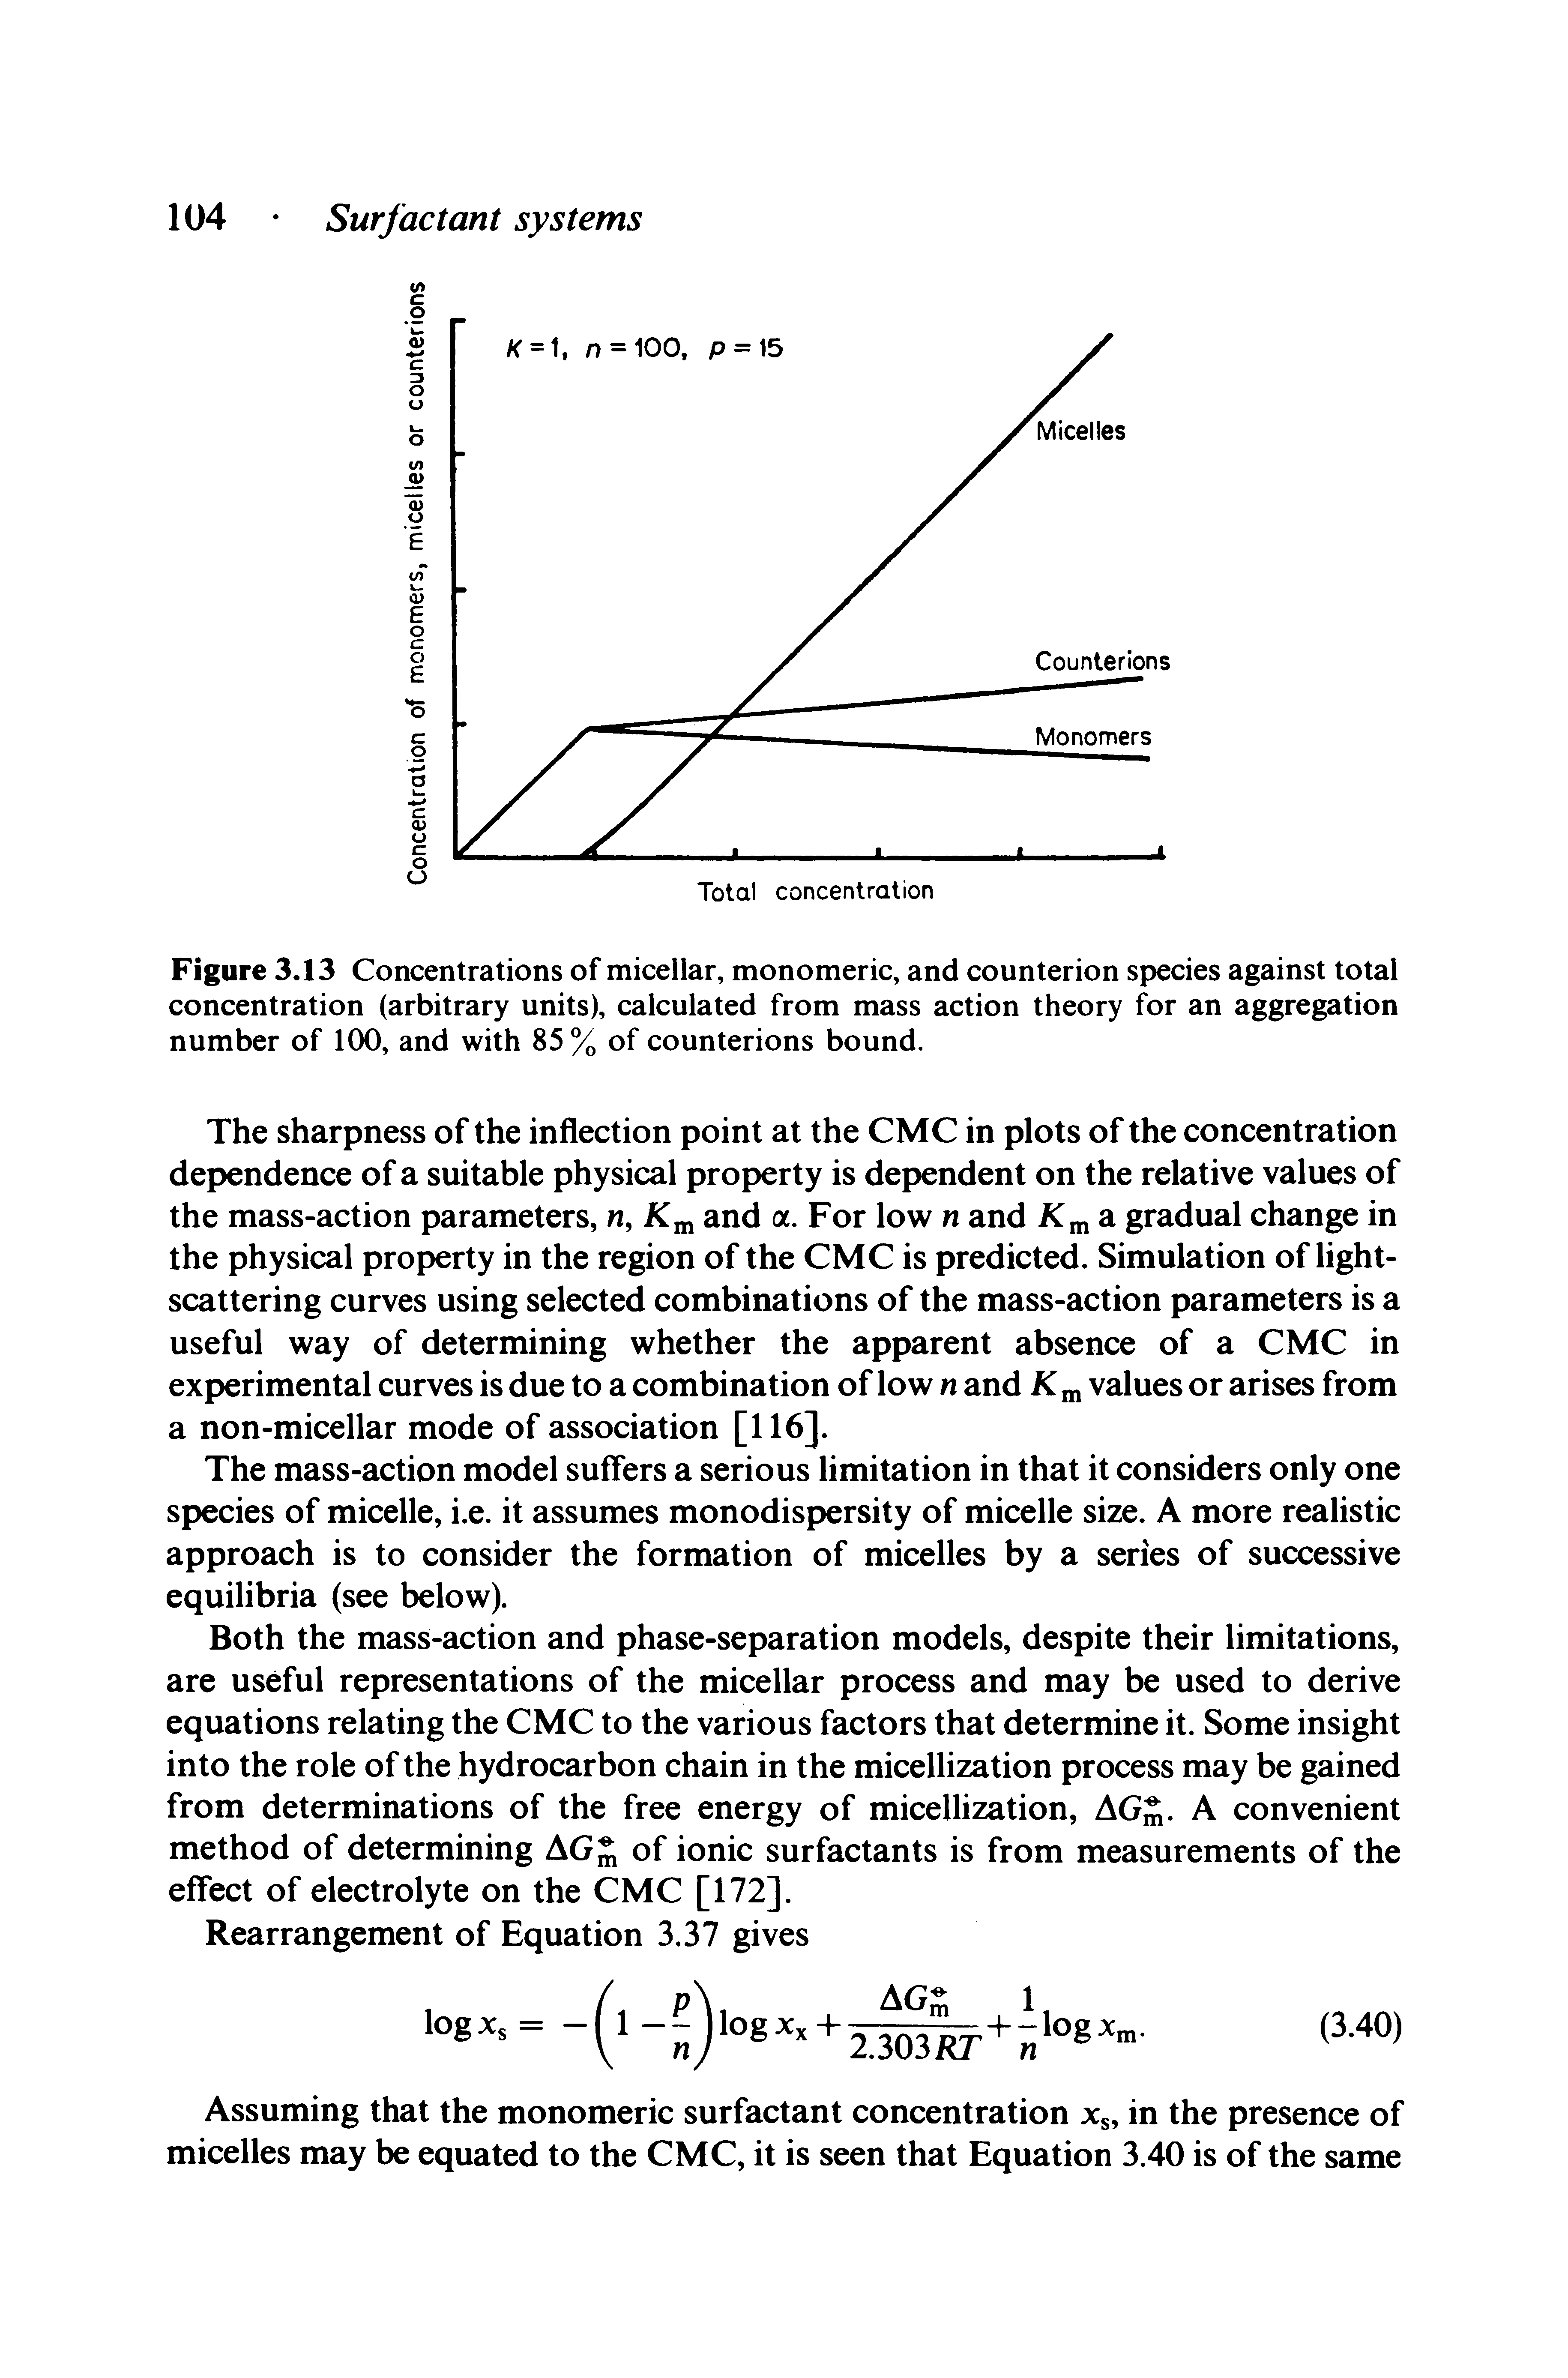 Figure 3.13 Concentrations of micellar, monomeric, and counterion species against total concentration (arbitrary units), calculated from mass action theory for an aggregation number of 100, and with 85 % of counterions bound.